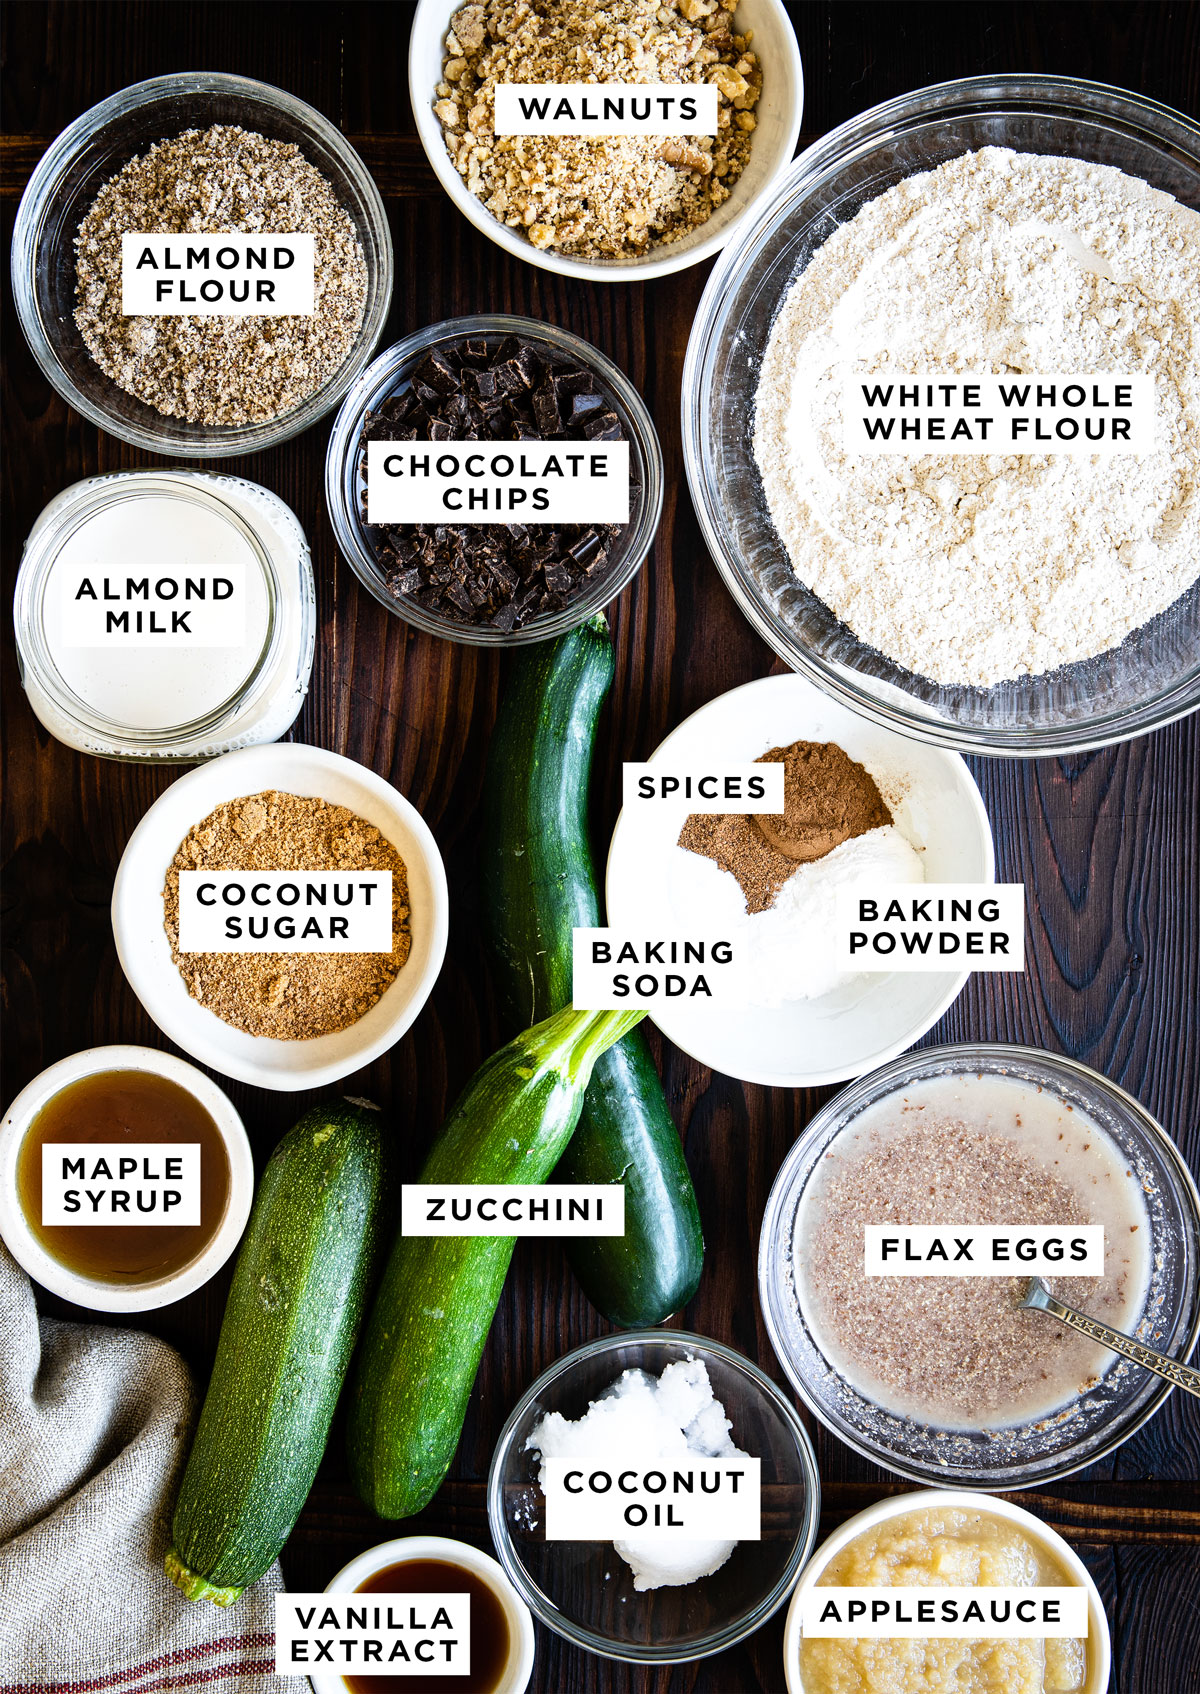 labeled ingredients for zucchini bread recipe including walnuts, almond flour, chocolate chips, white whole wheat flour, almond milk, coconut sugar, spices, baking soda, baking powder, maple syrup, zucchini, flax eggs, coconut oil, vanilla extract and applesauce.